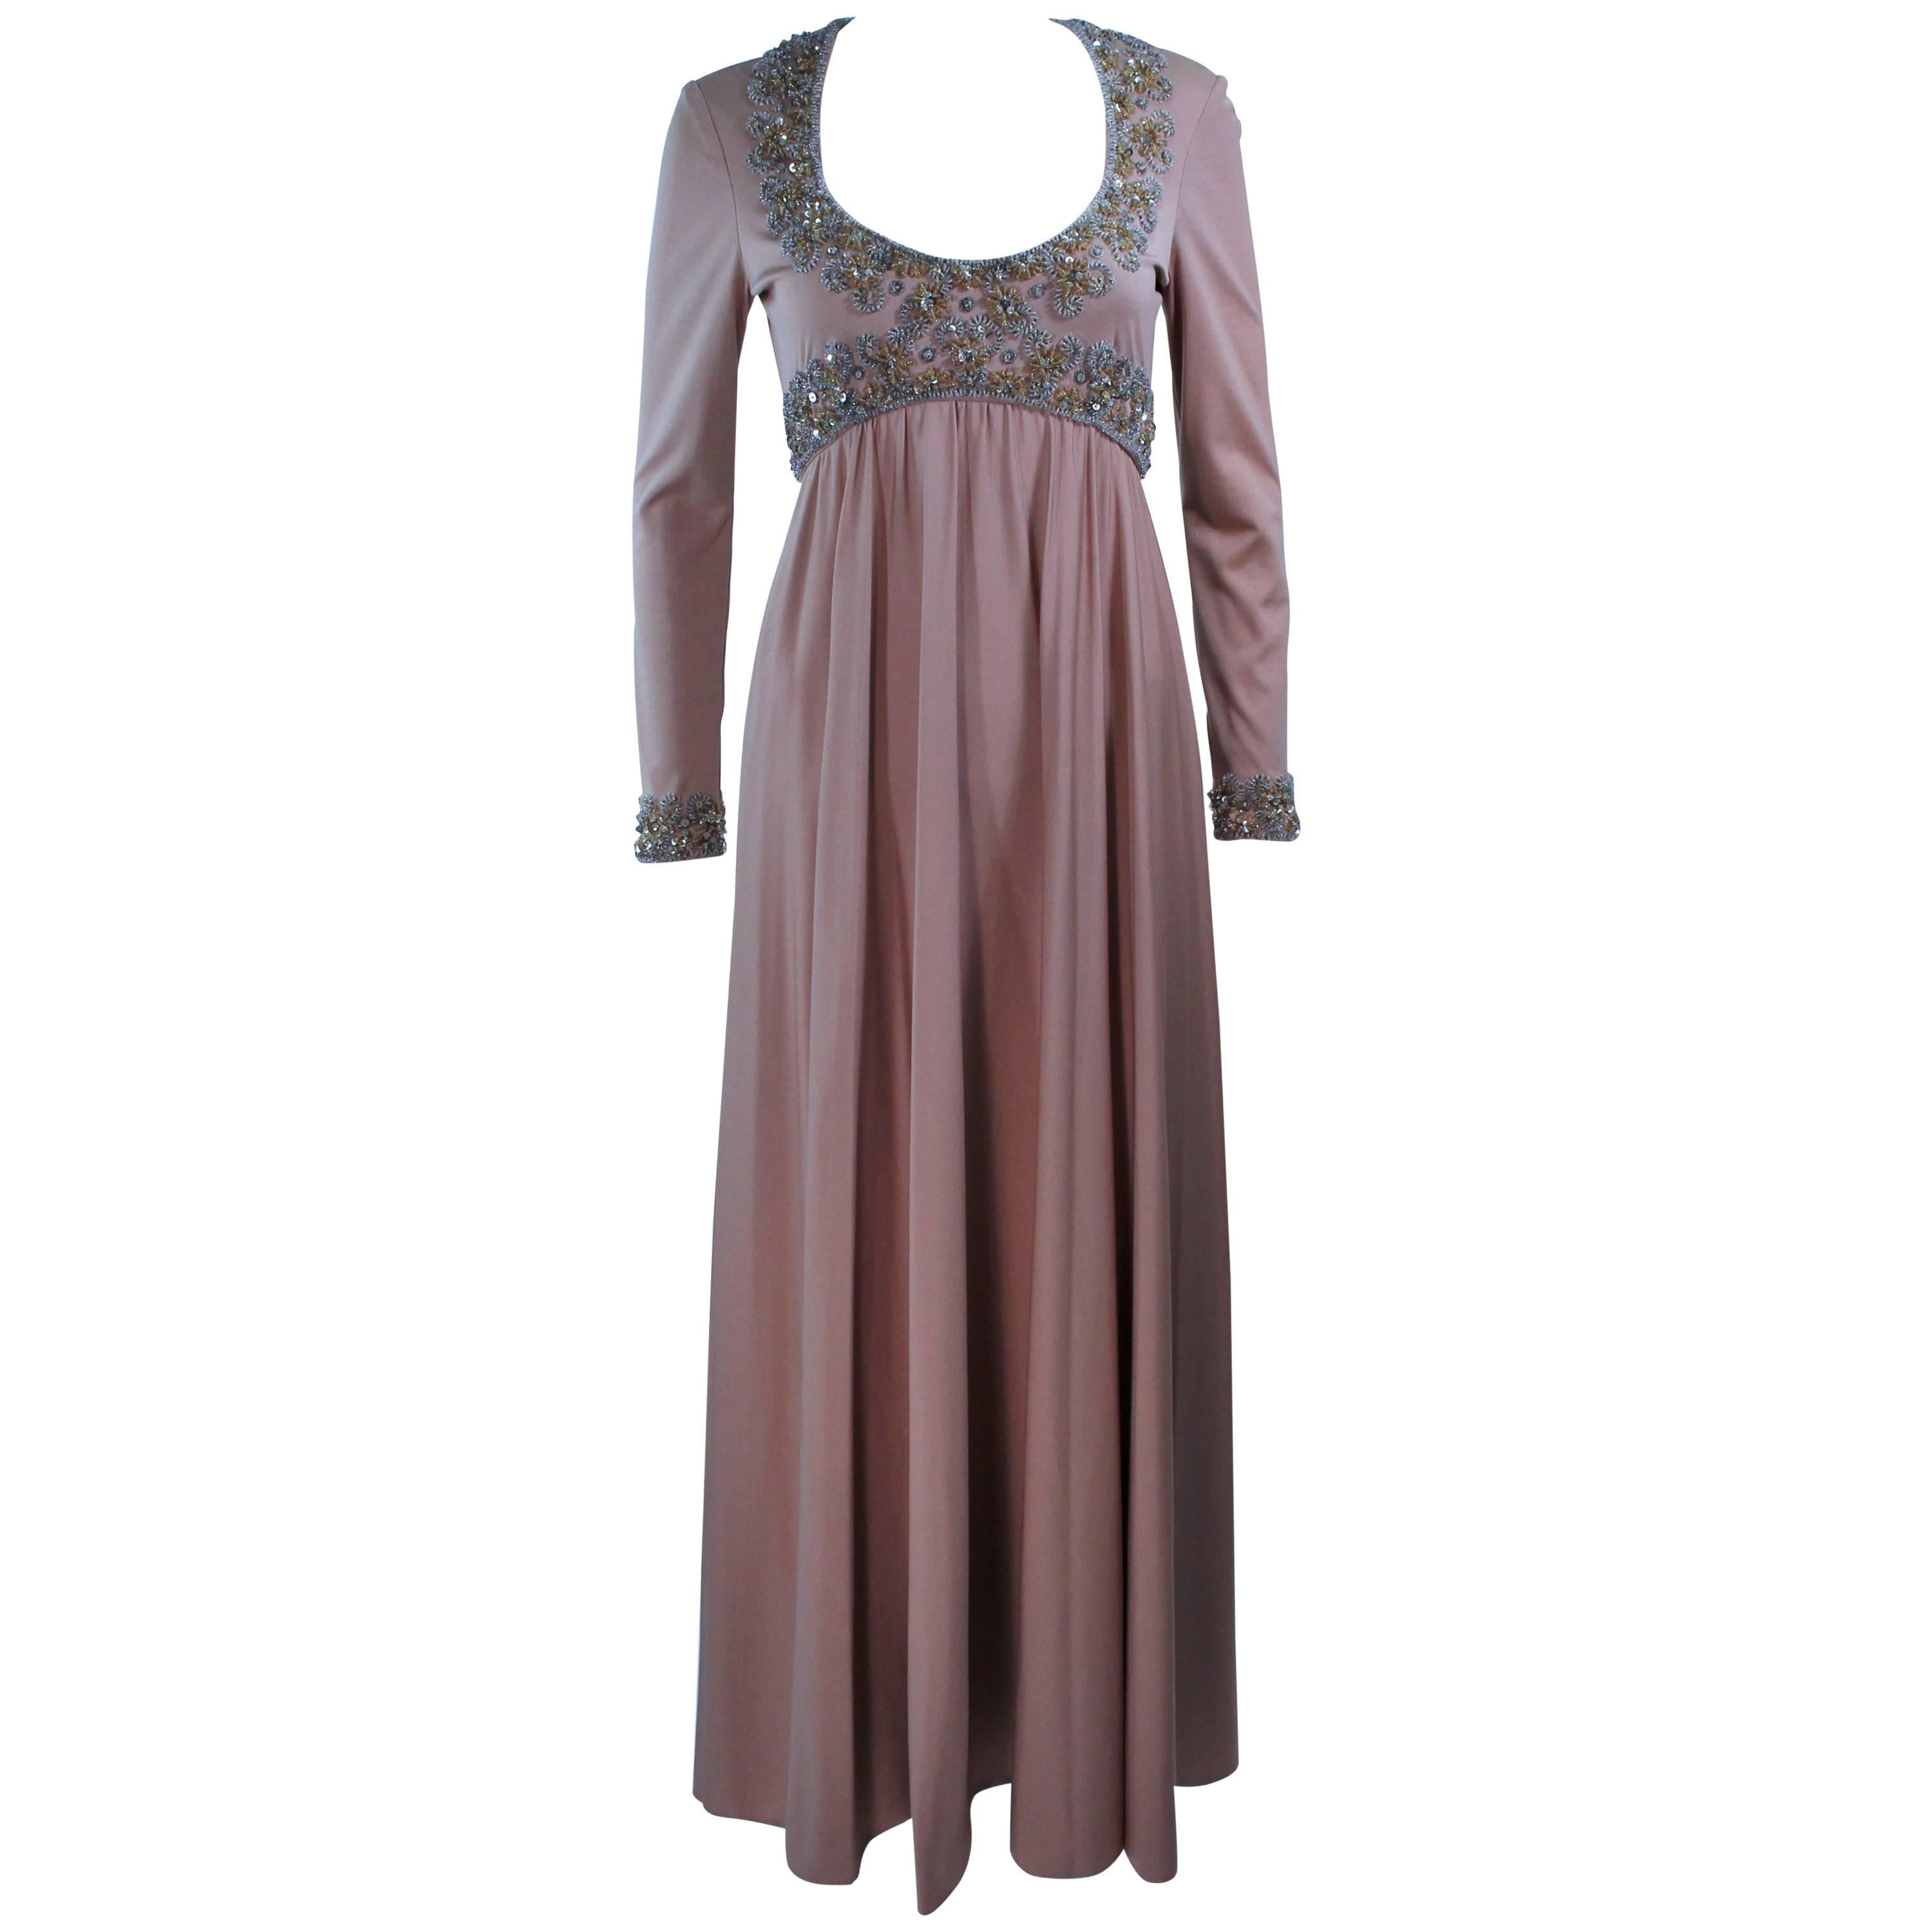 VICTORIA ROYAL Toffee Jersey Embellished Gown Size 6 8 For Sale